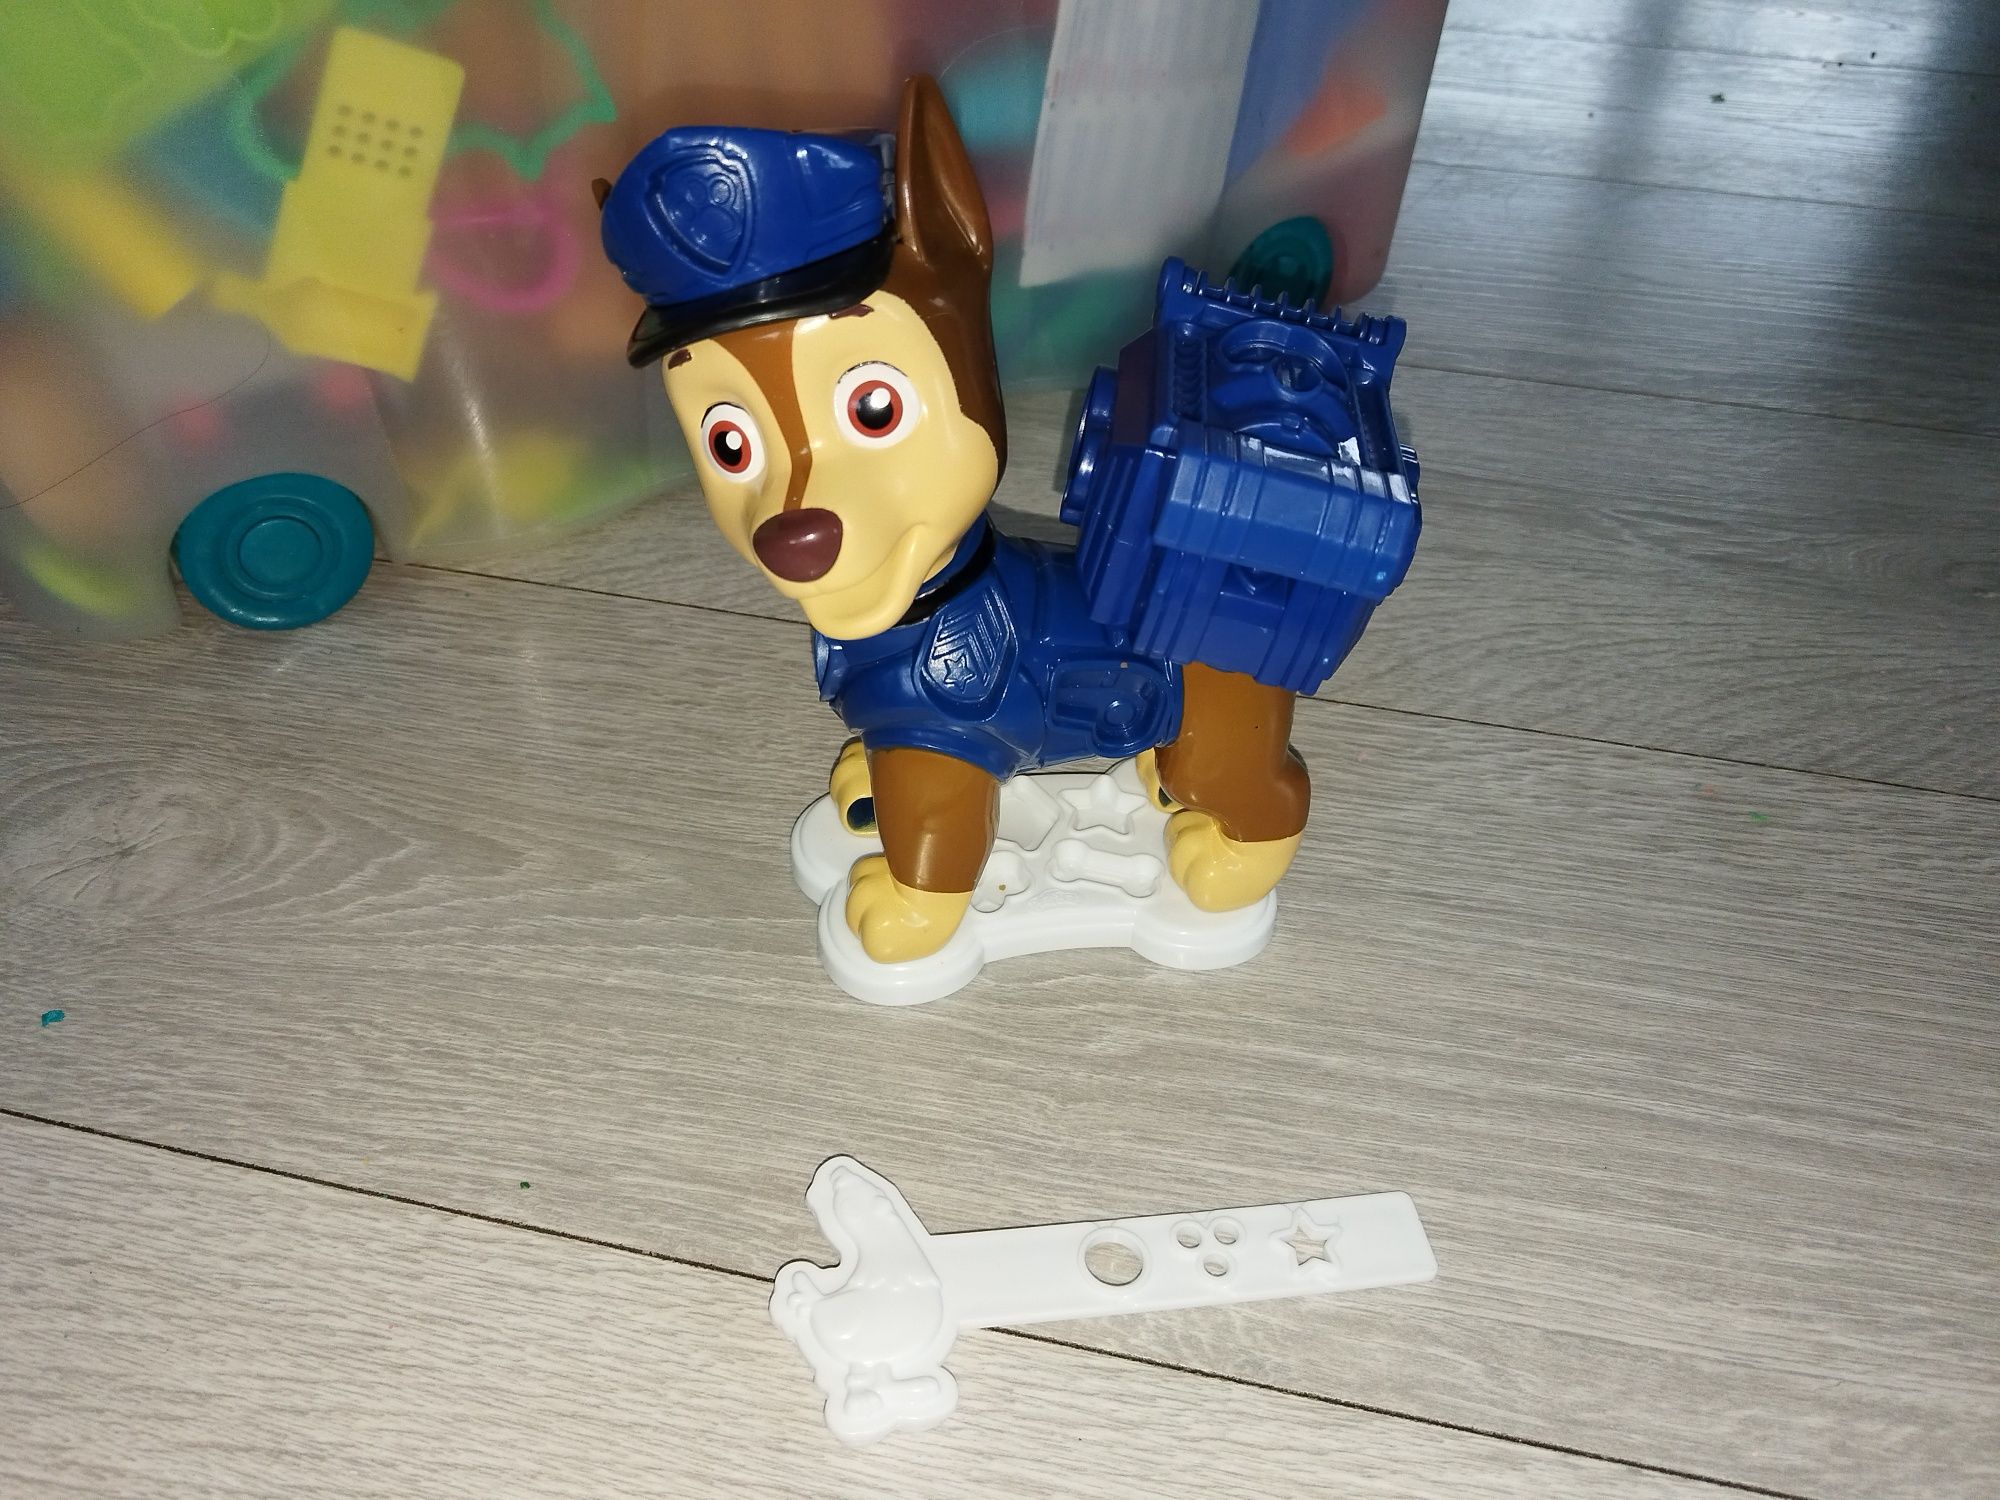 Play doh psi patrol chase